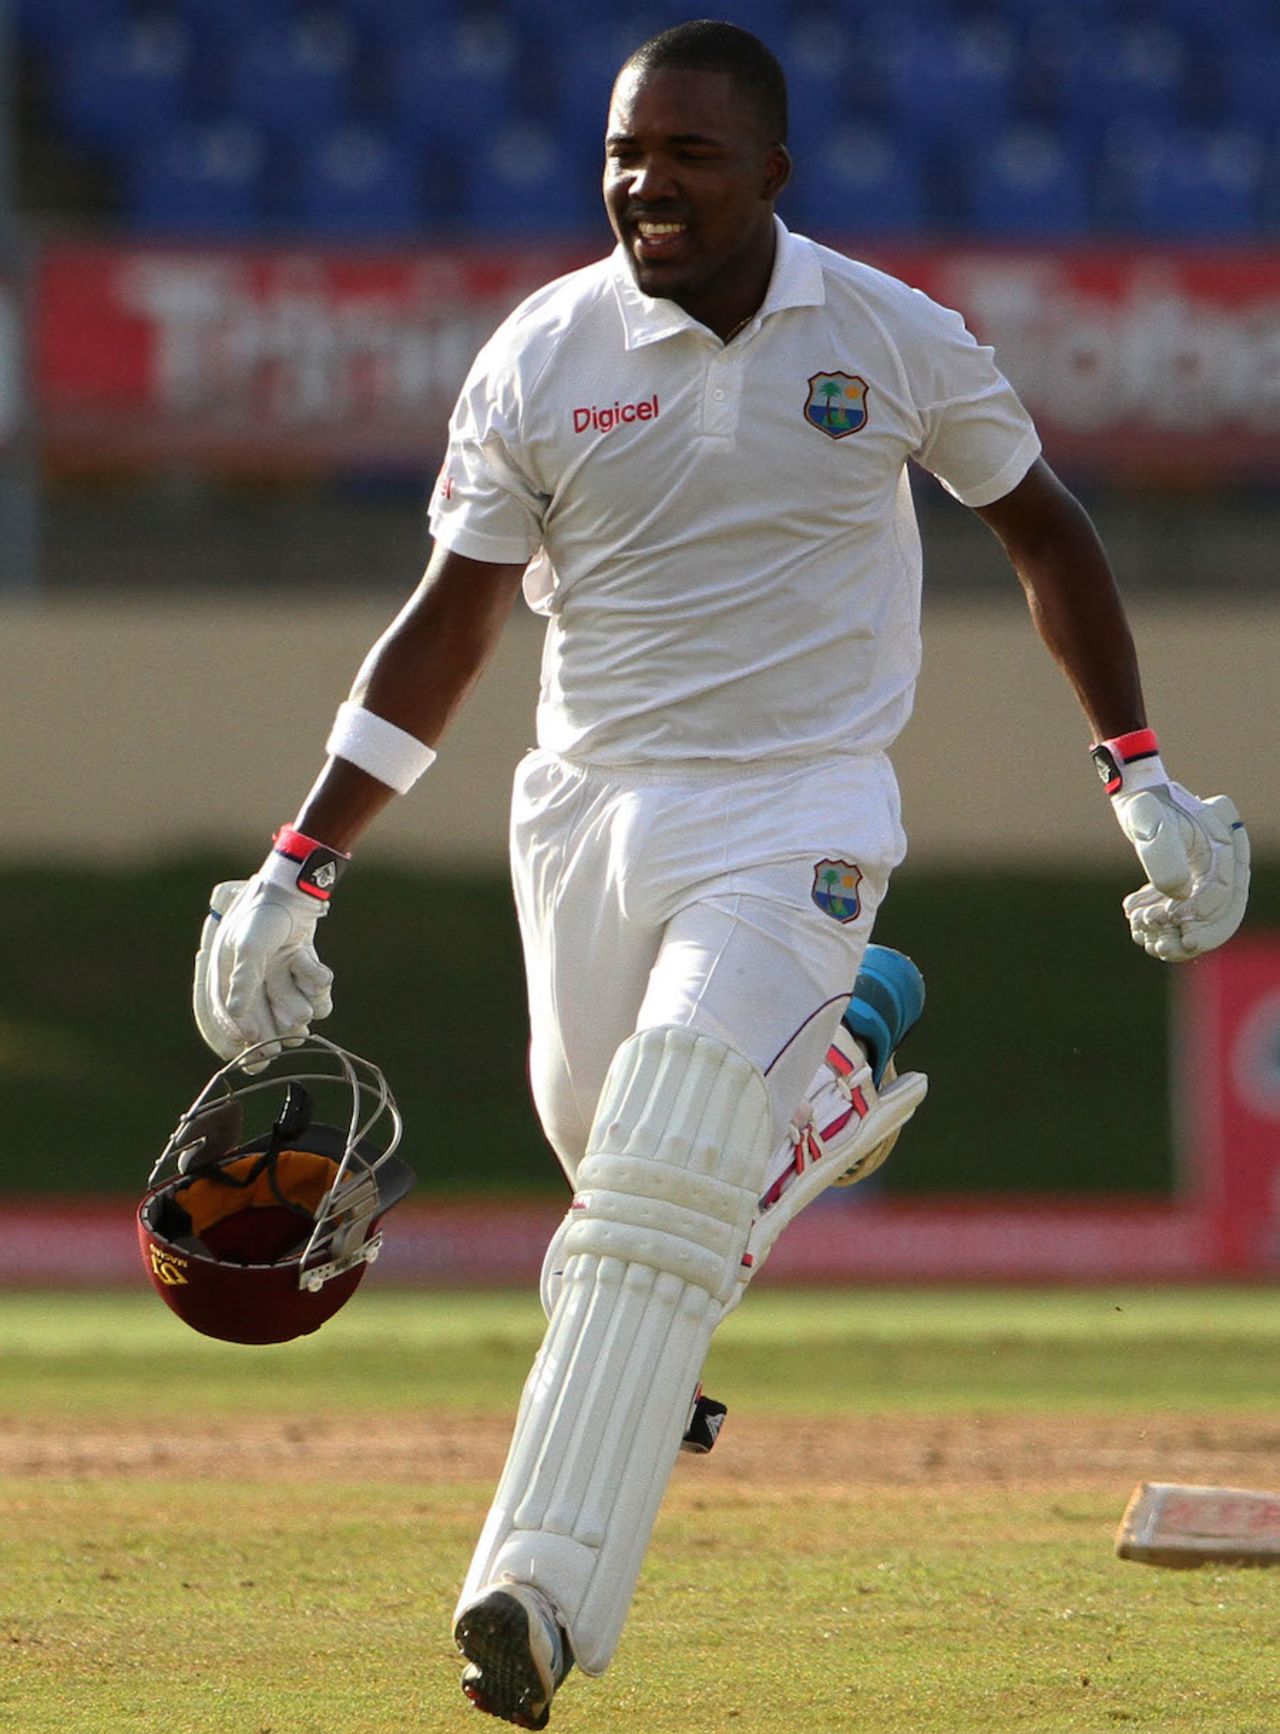 Darren Bravo takes off after reaching his first hundred on his home ground, West Indies v New Zealand, 2nd Test, Trinidad, 2nd day, June 17, 2014